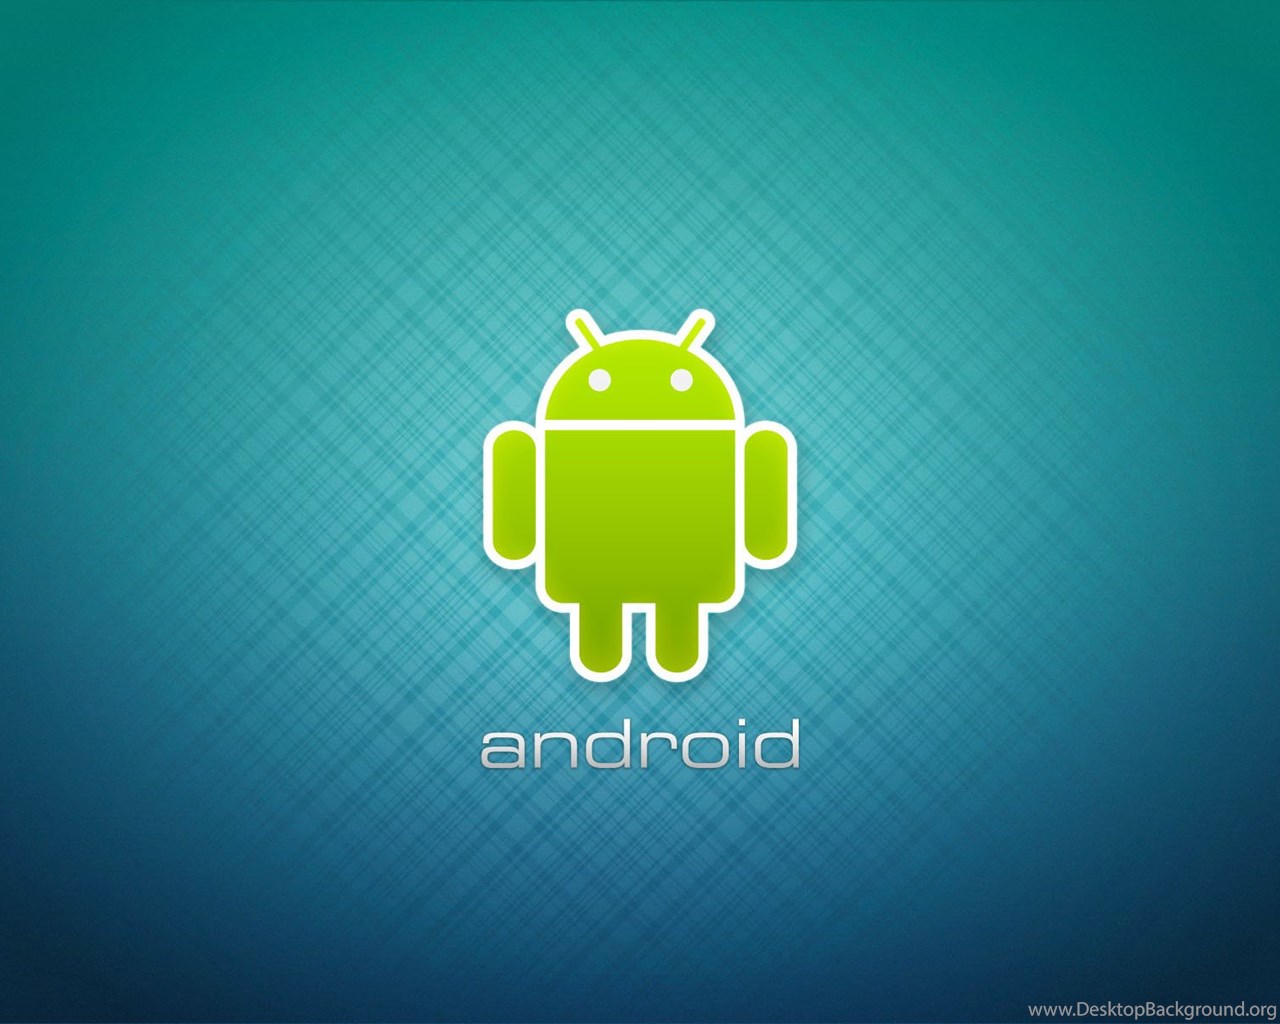 Android блоги